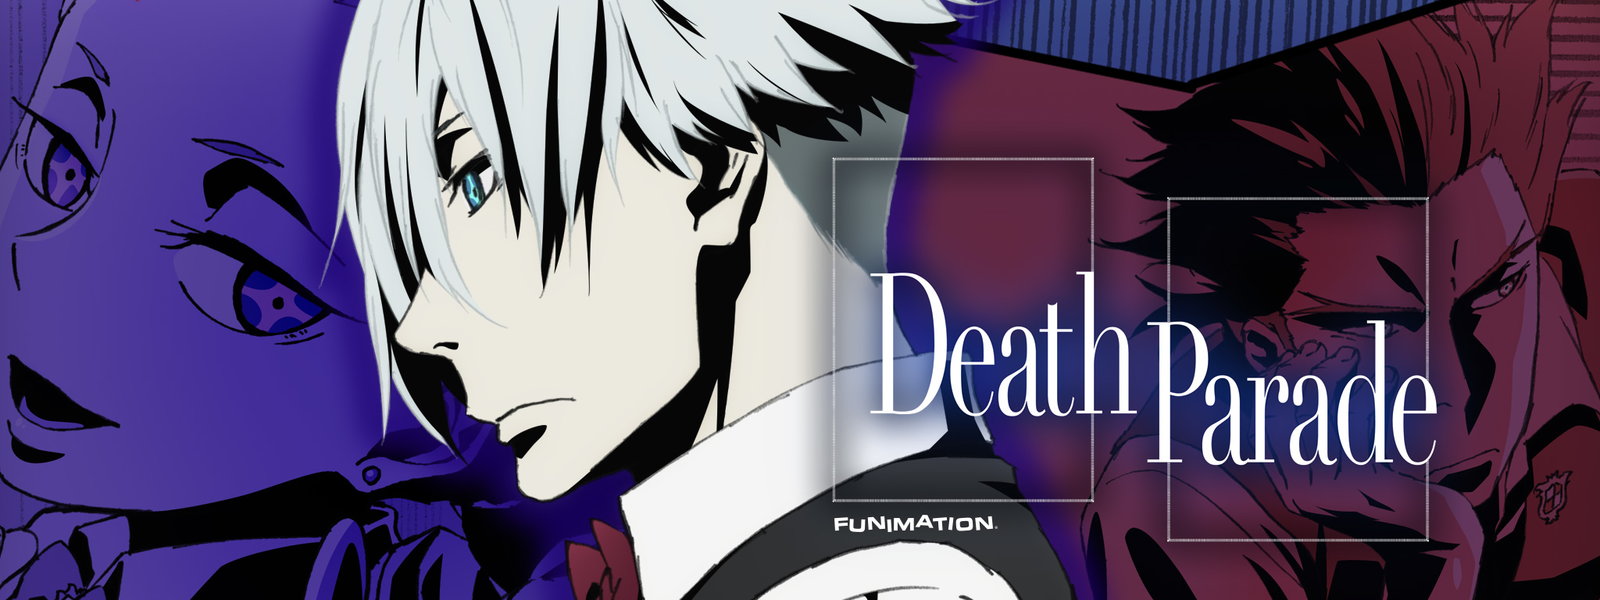 how to start watching anime, death parade